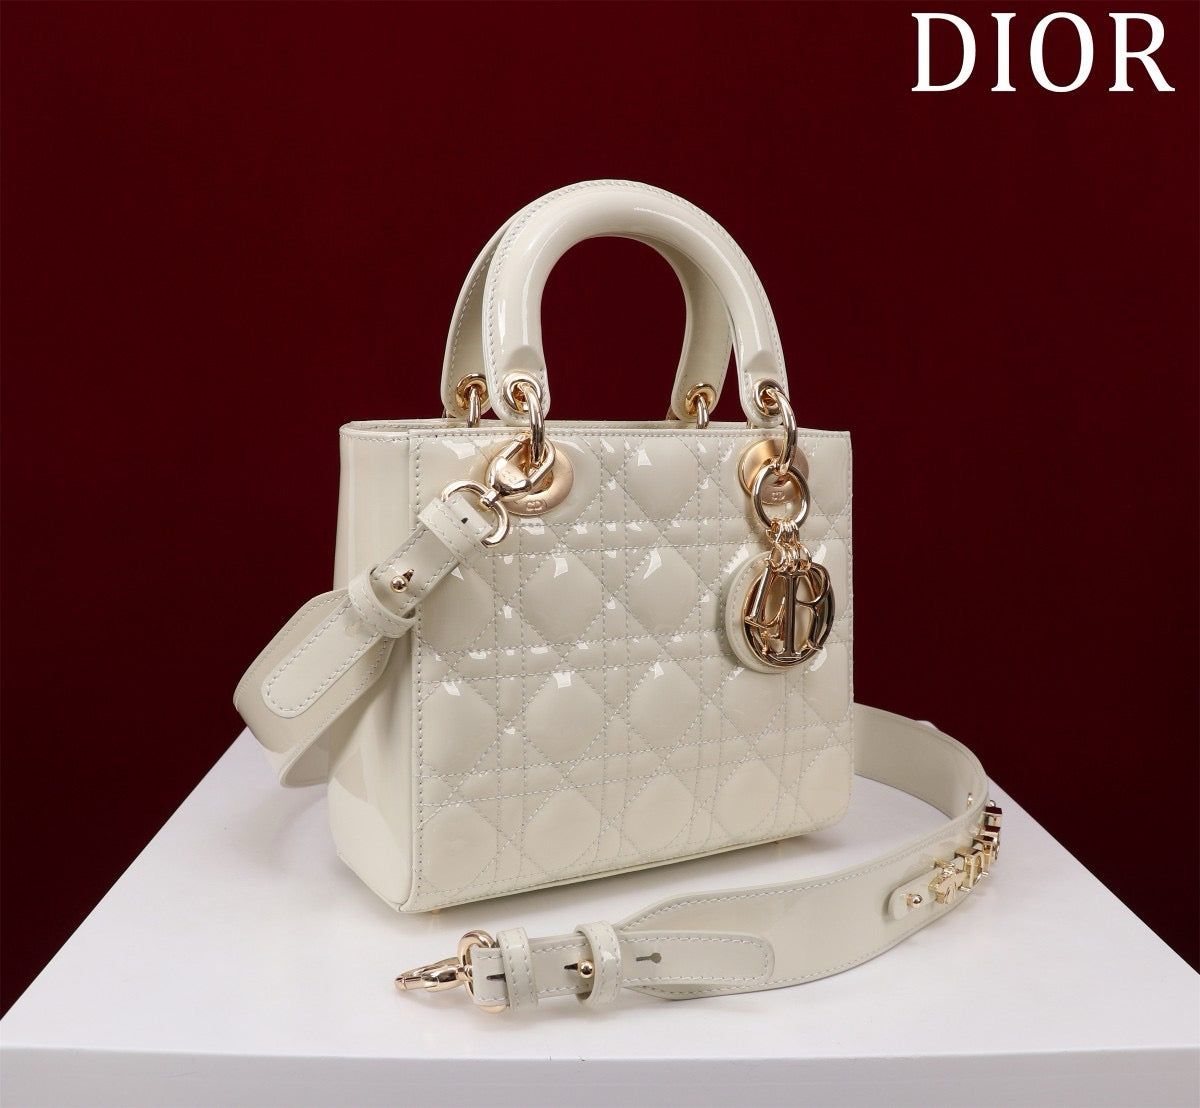 white patent leather lady dior bag